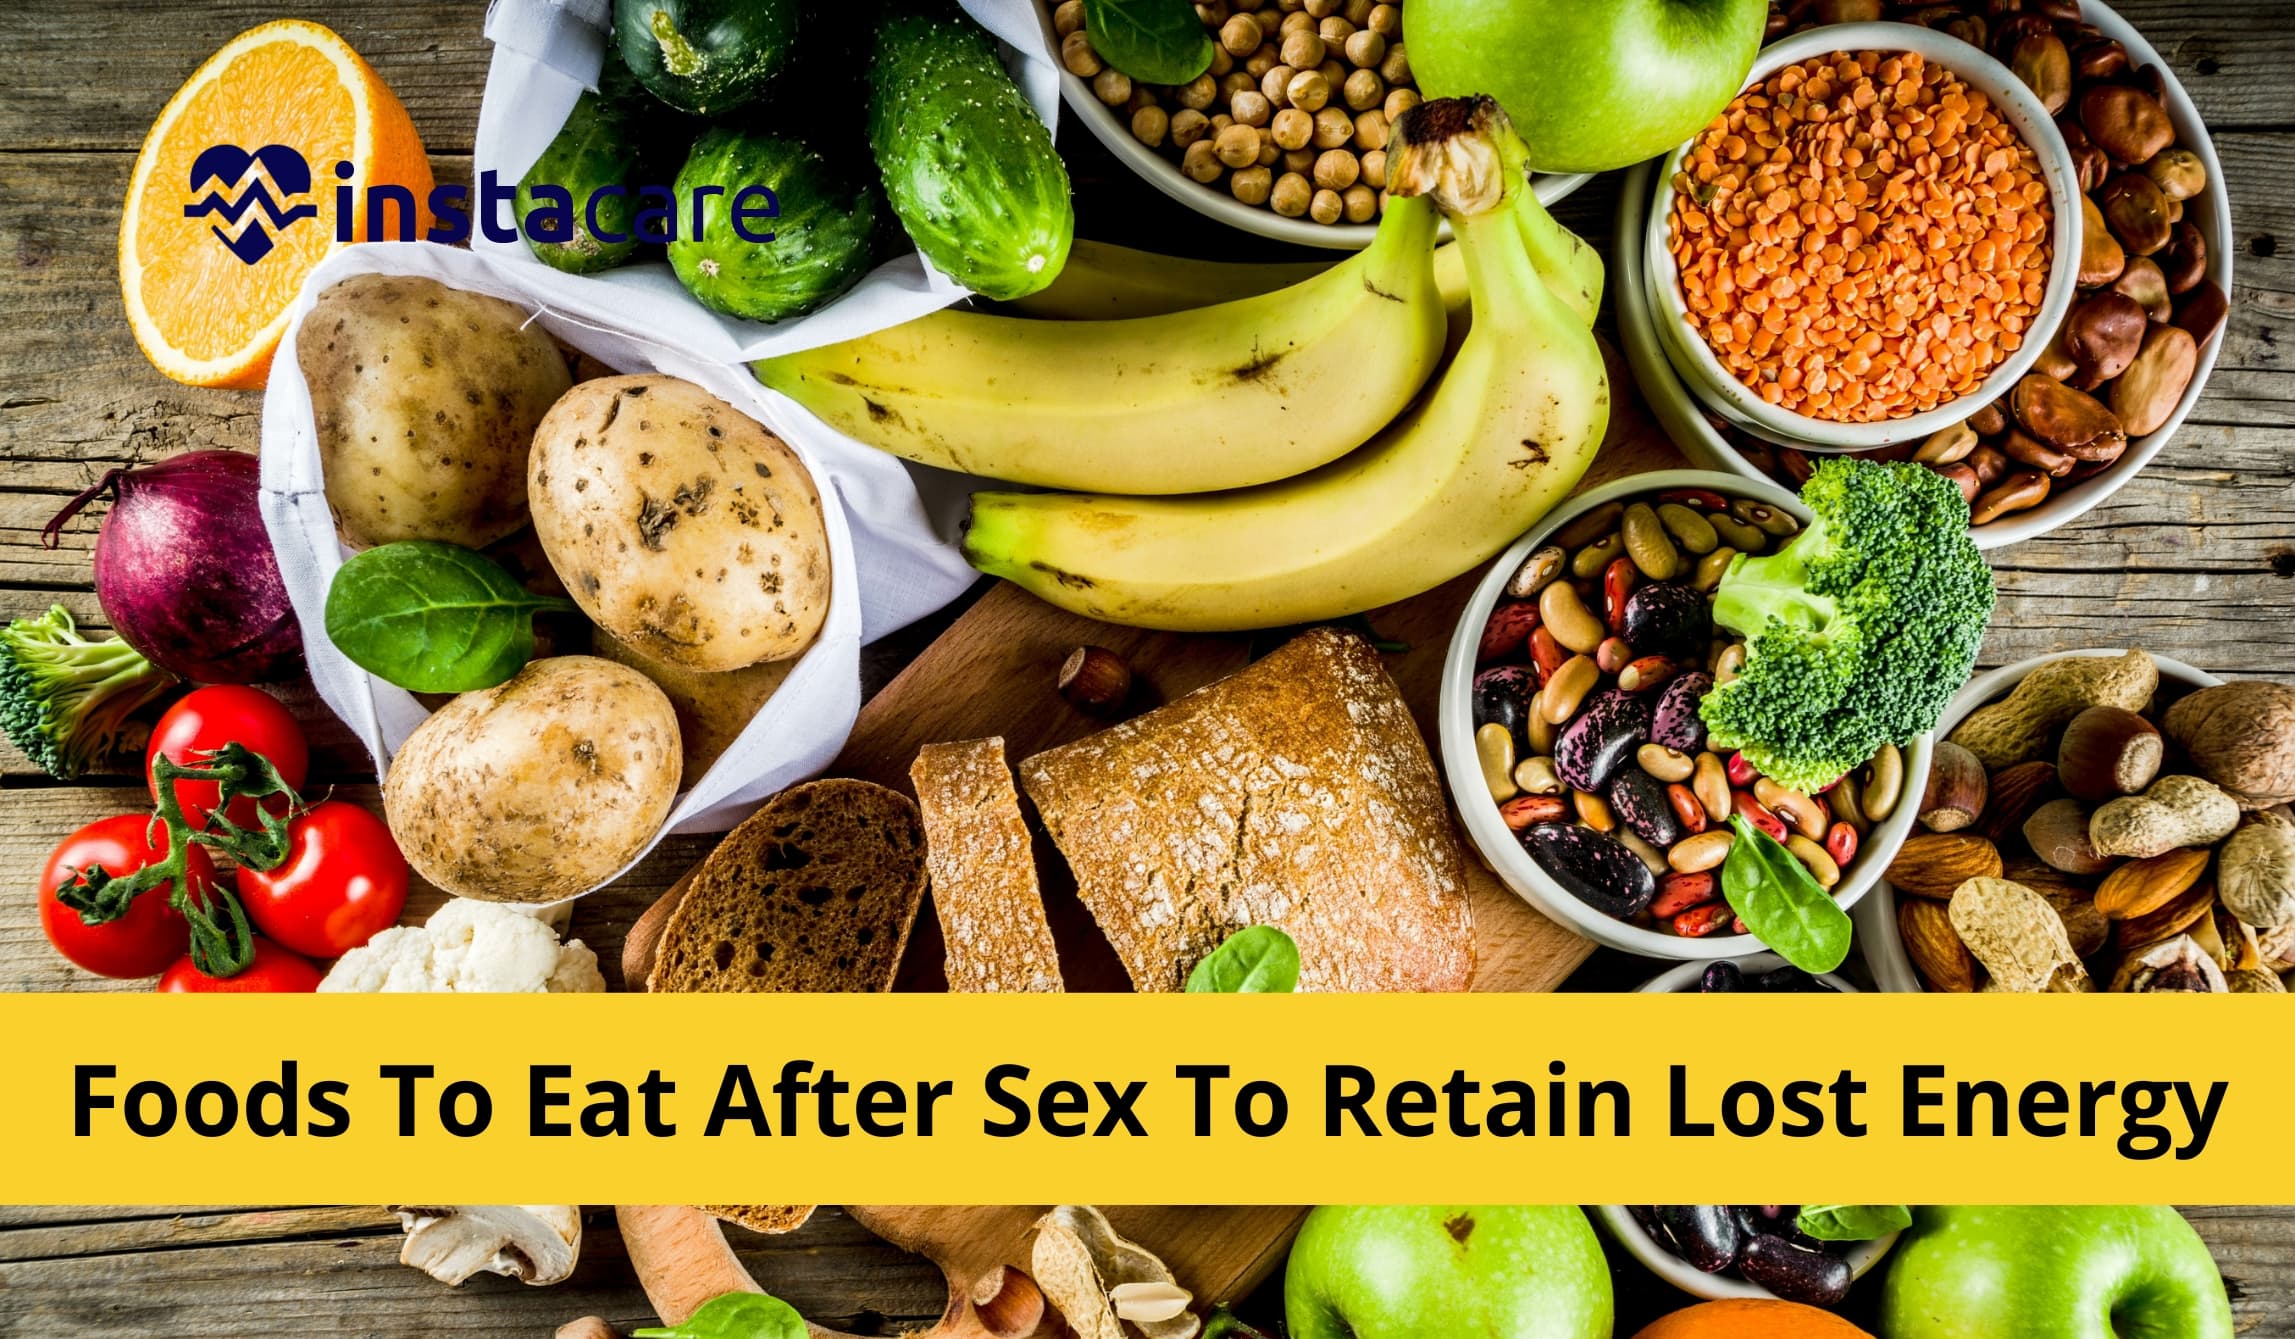 10 Foods You Should Eat After Sex To Retain Your Lost Energy